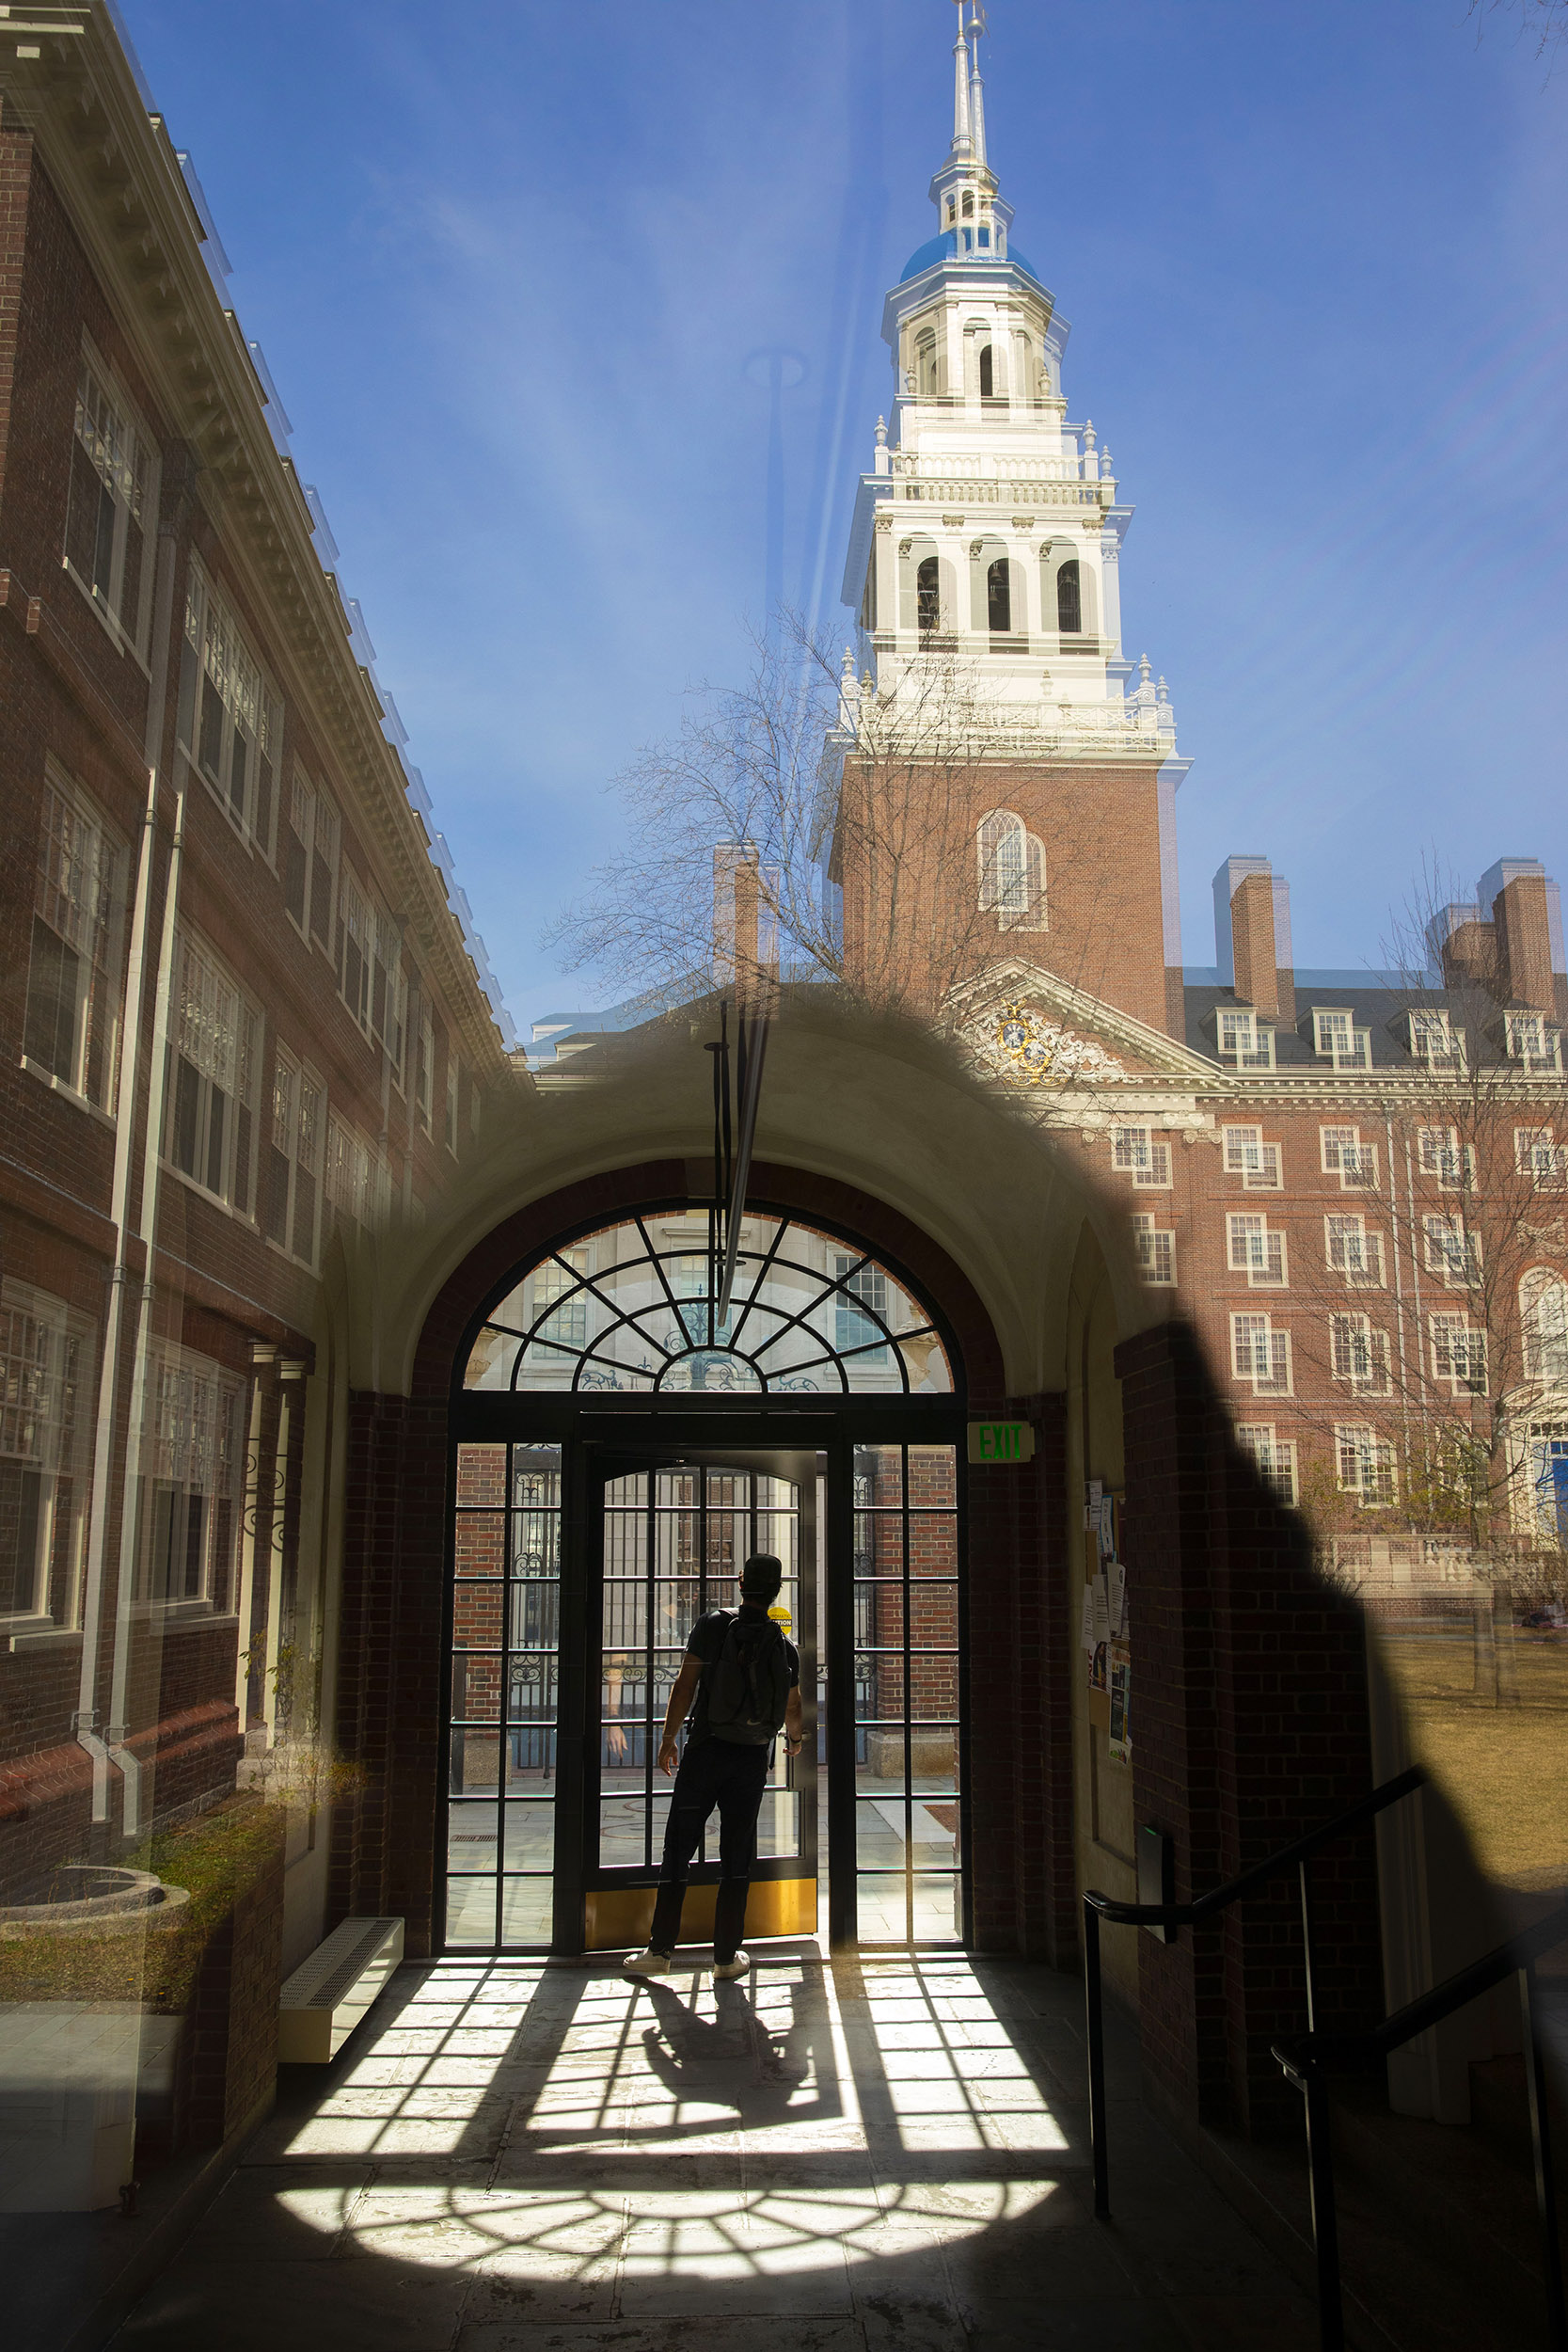 A student is framed by a bay window inside the passageway leading to the dining hall in Lowell House courtyard.